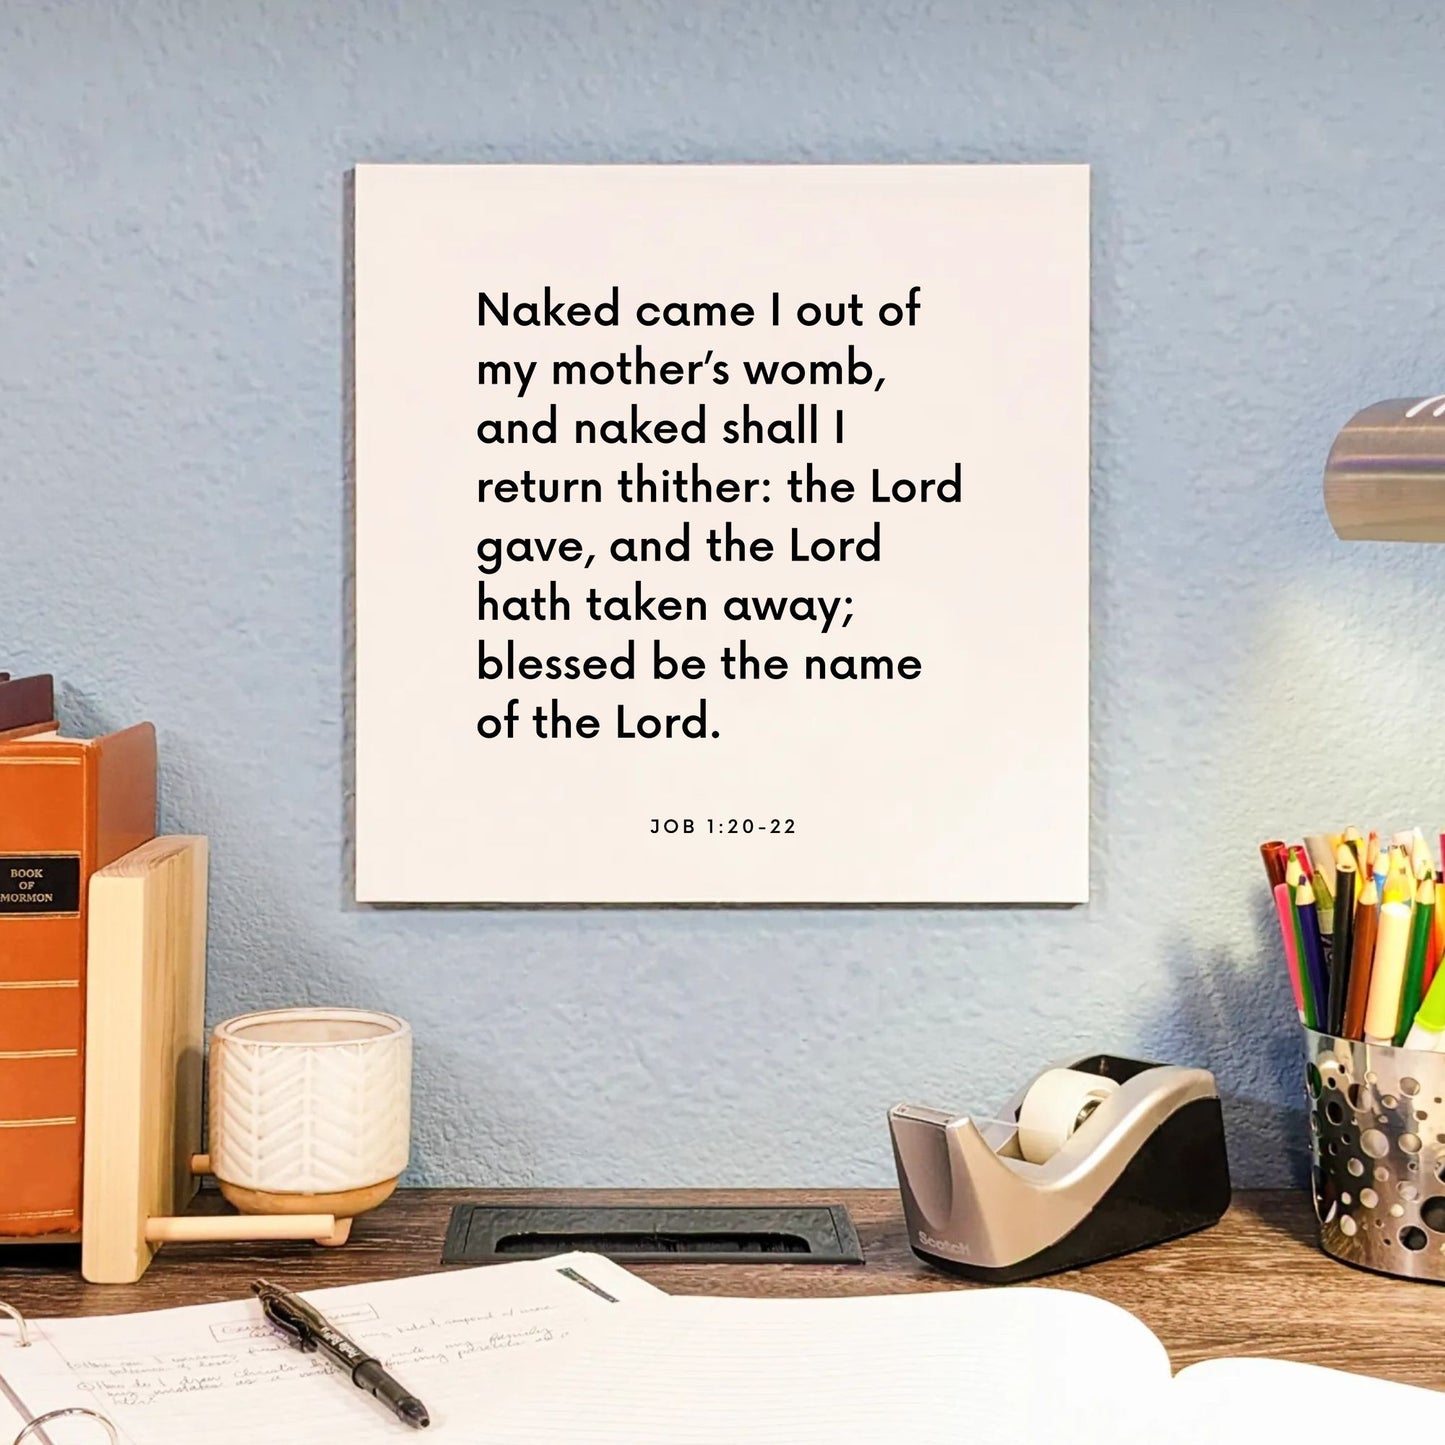 Desk mouting of the scripture tile for Job 1:20-22 - "Naked came I out of my mother’s womb, naked shall I return"